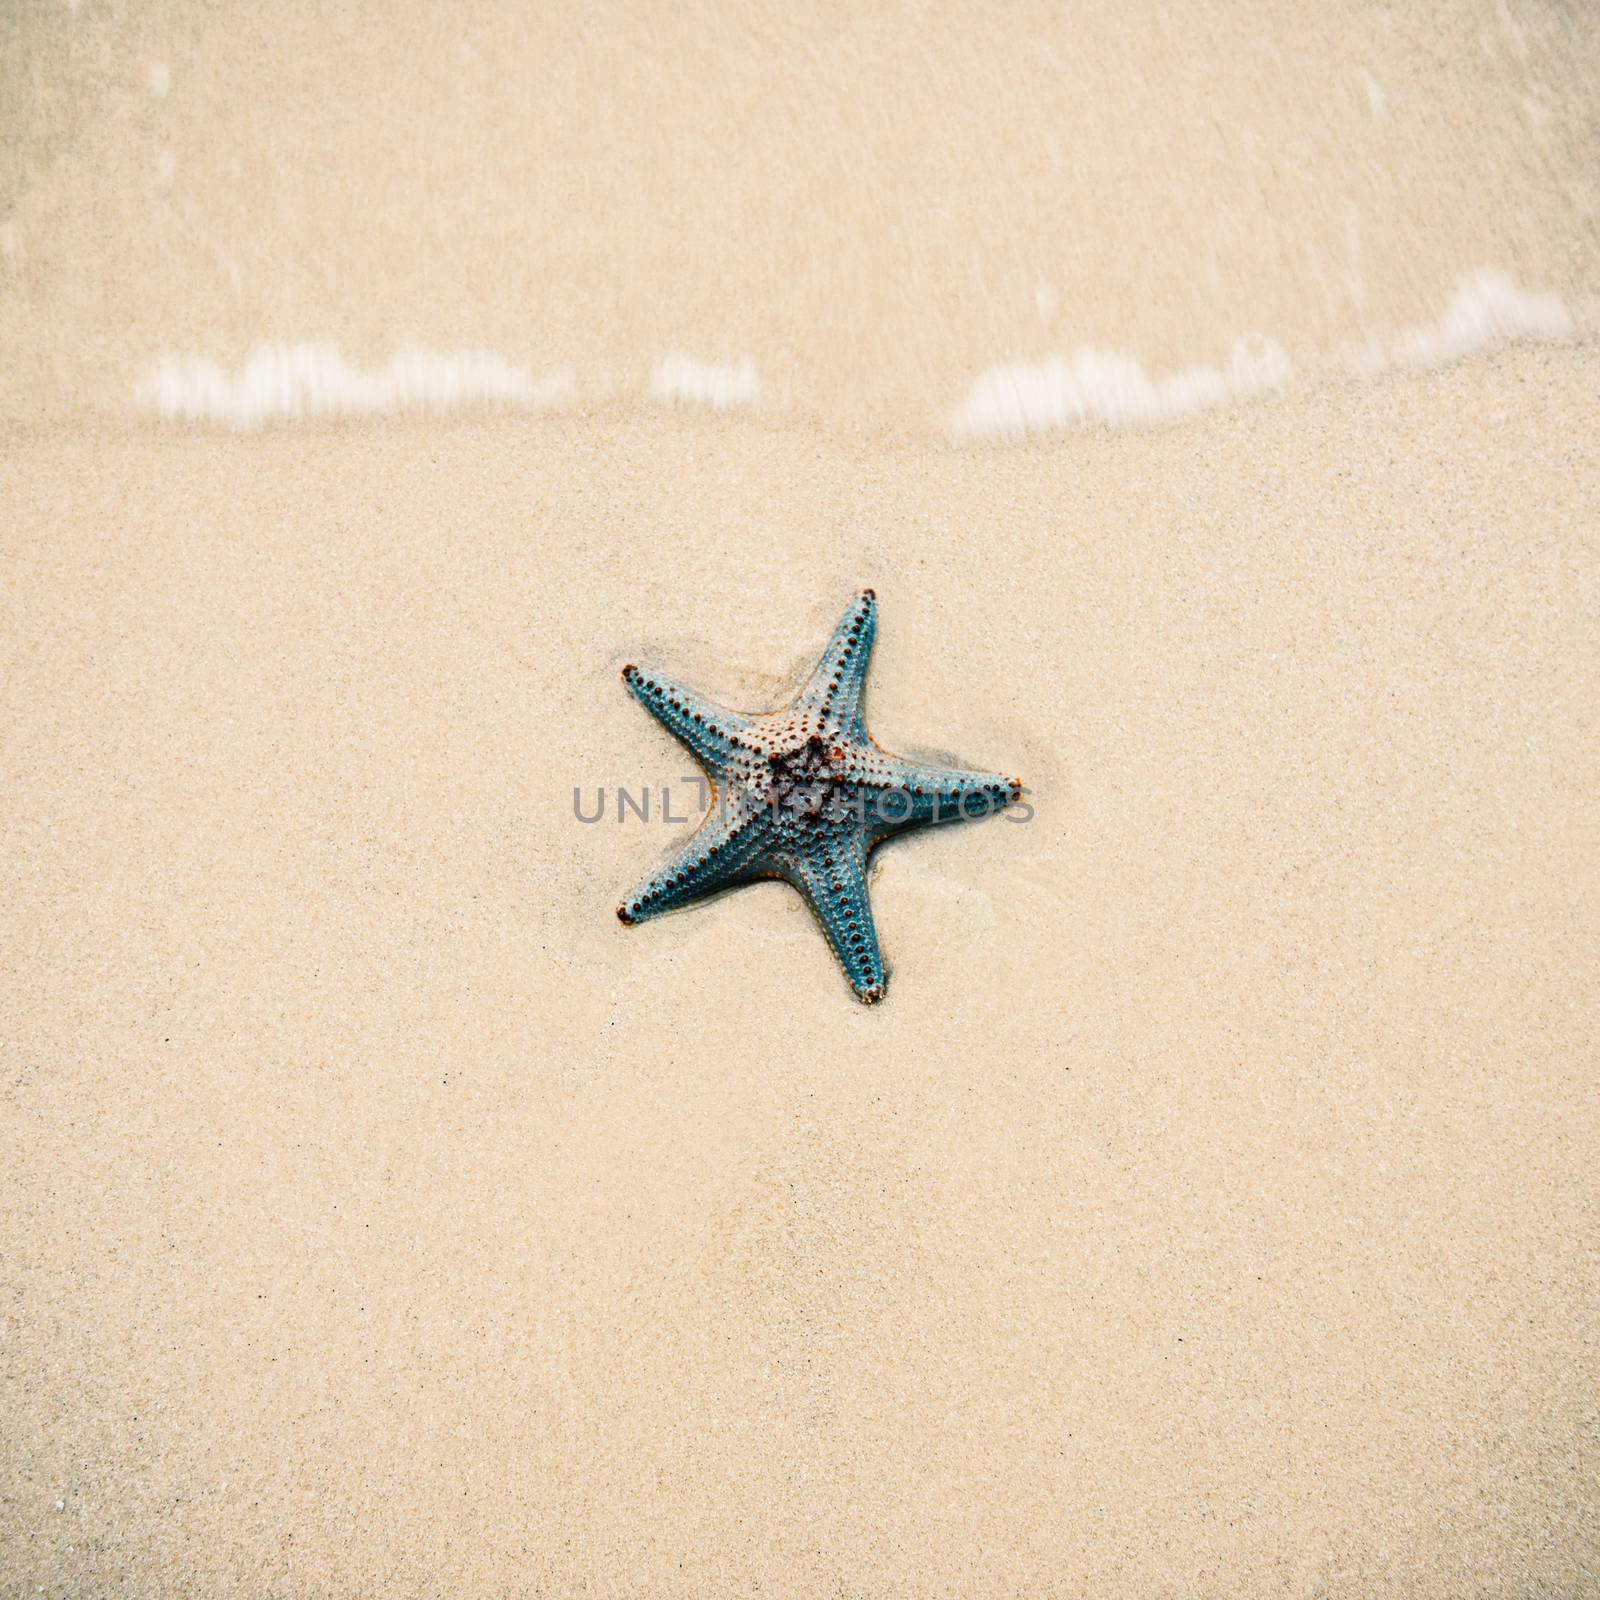 Starfish by itself on the beach at Moreton Bay during the day.